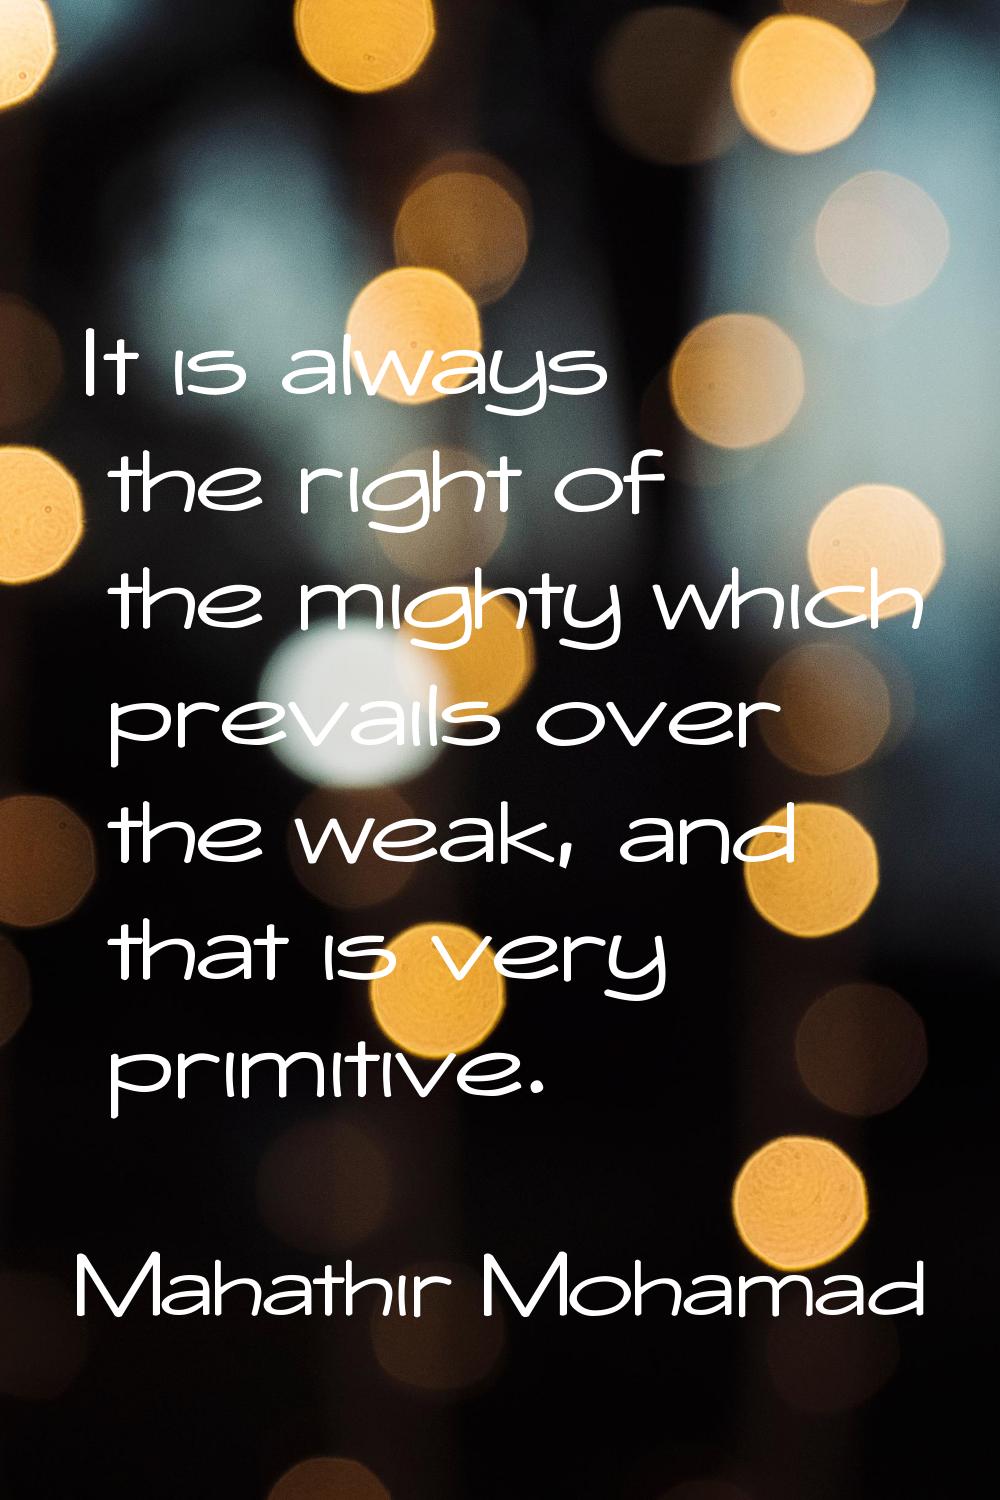 It is always the right of the mighty which prevails over the weak, and that is very primitive.